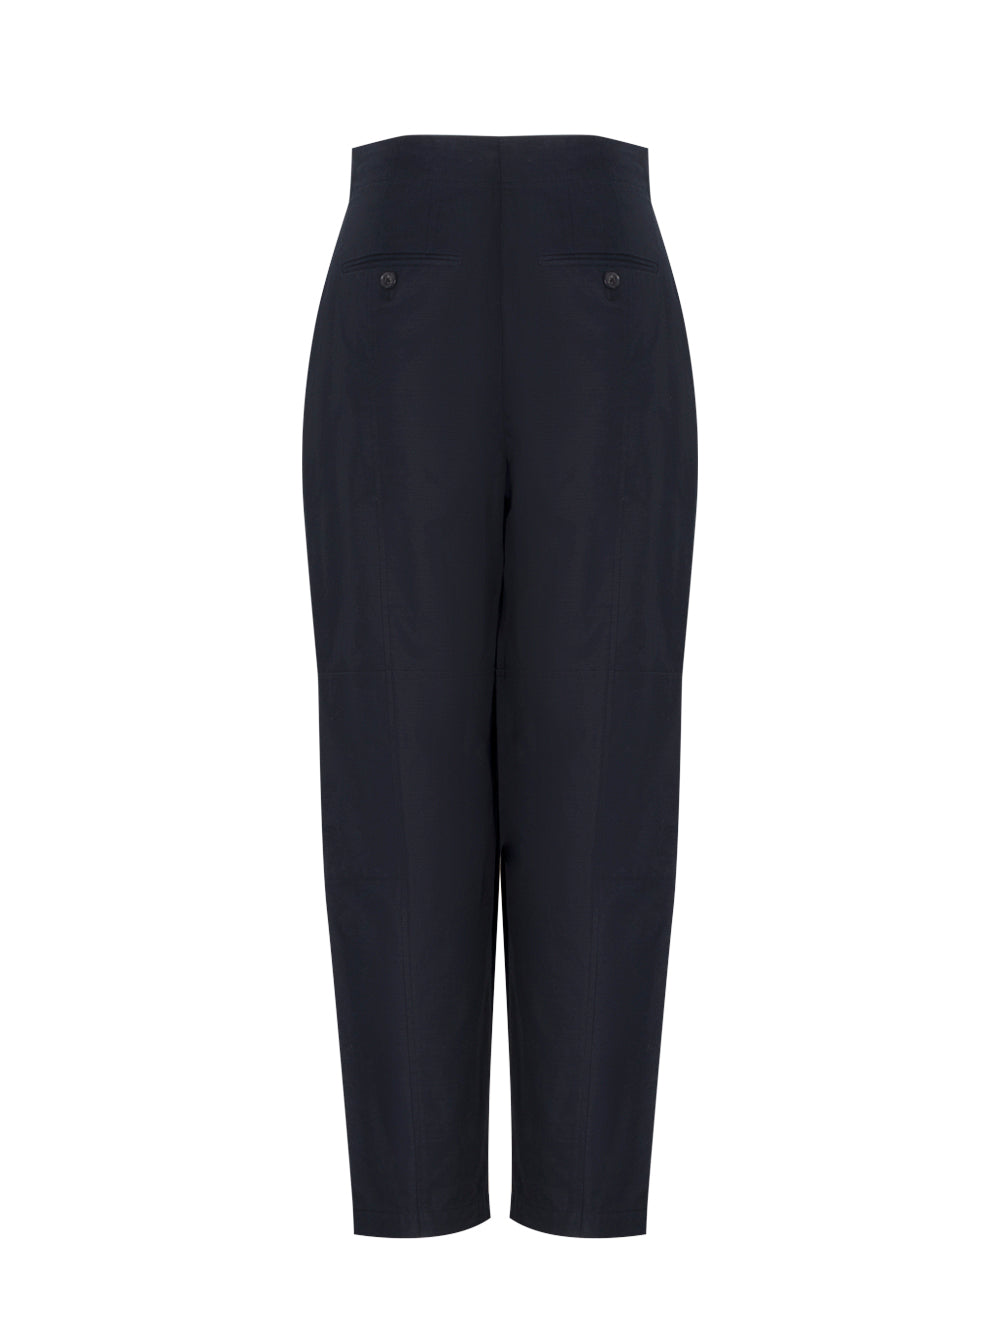 Wide Leg Pant With Pockets (Black)